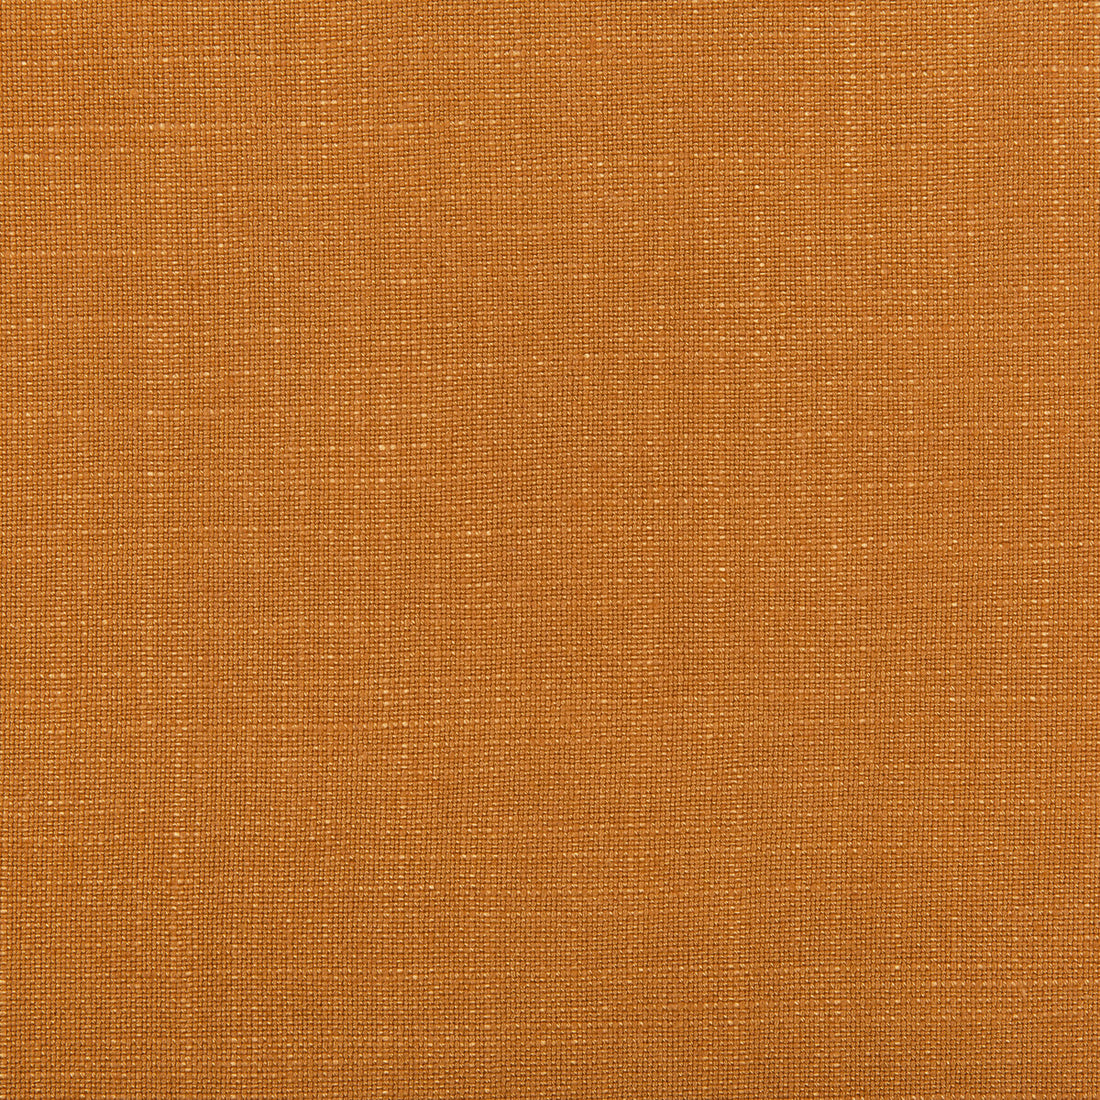 Aura fabric in yam color - pattern 35520.12.0 - by Kravet Design